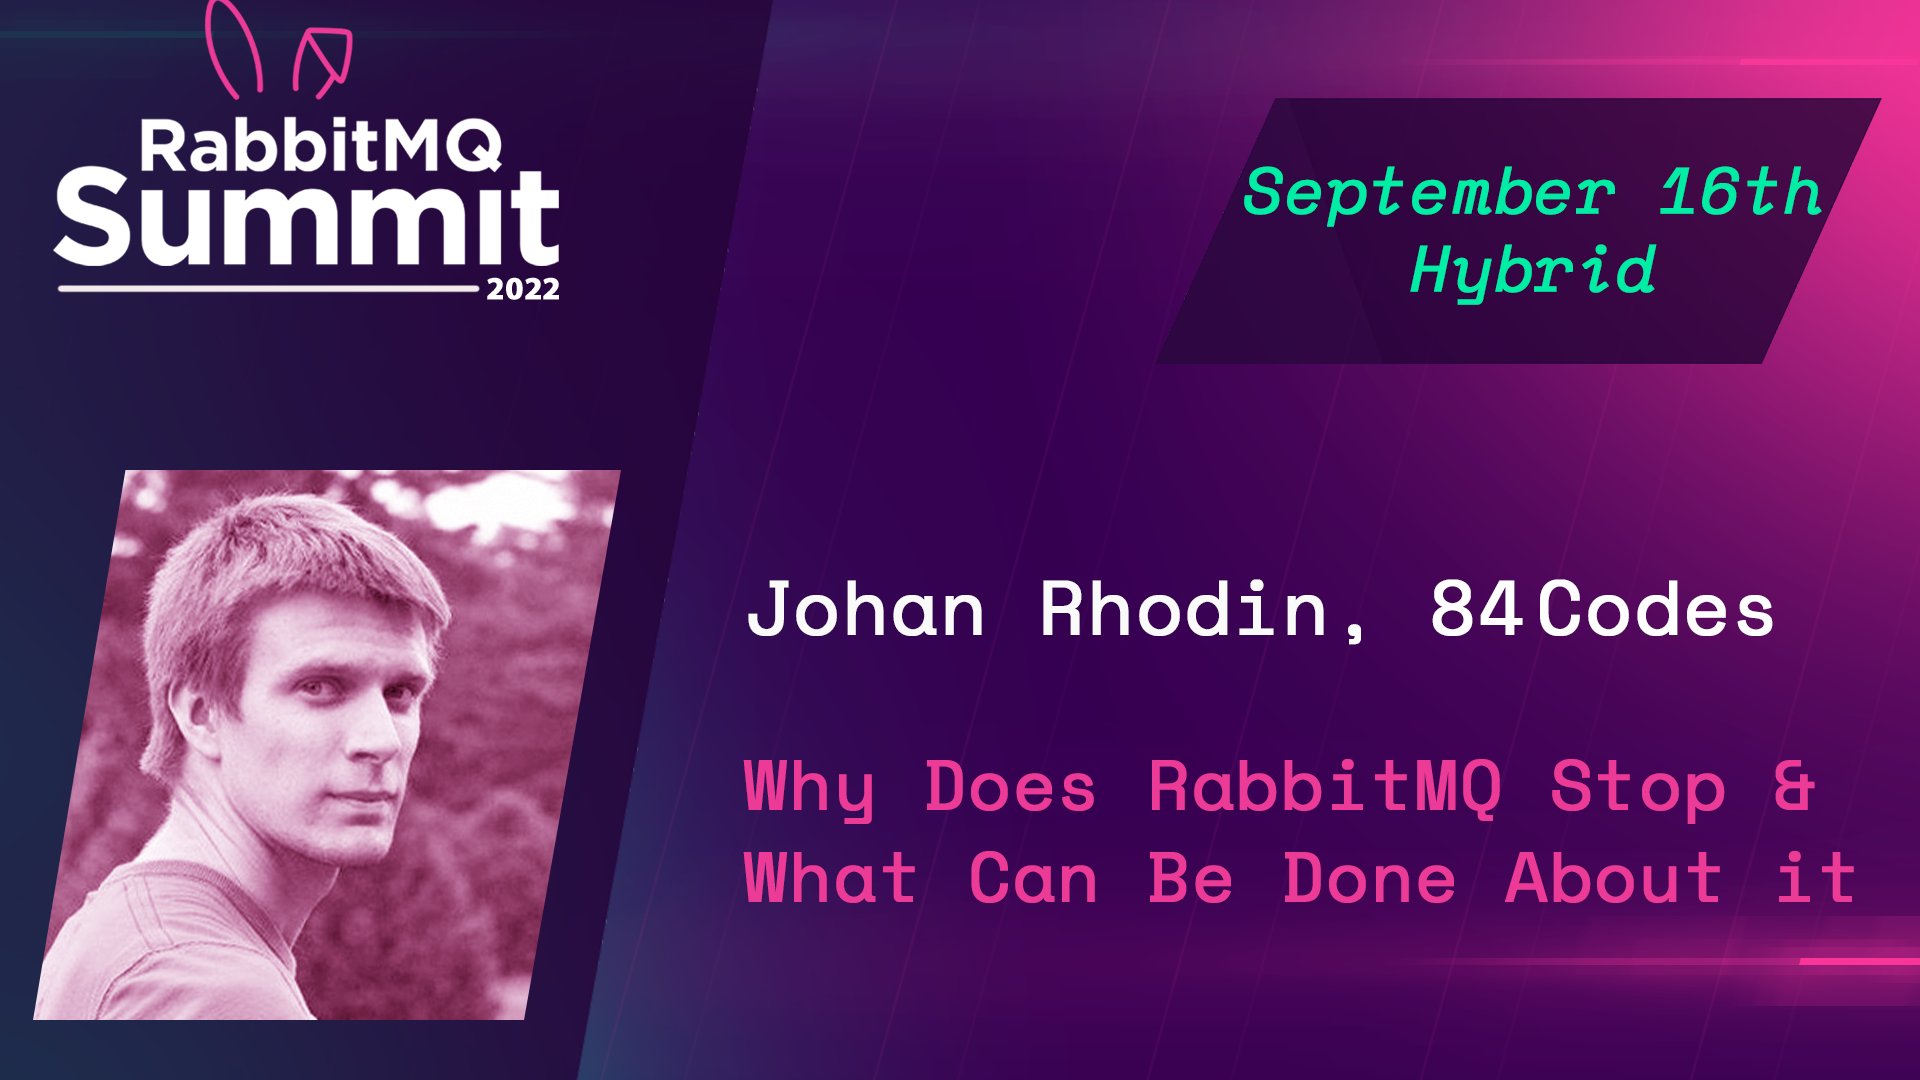 Why does RabbitMQ stop and what can be done about it - Johan Rhodin